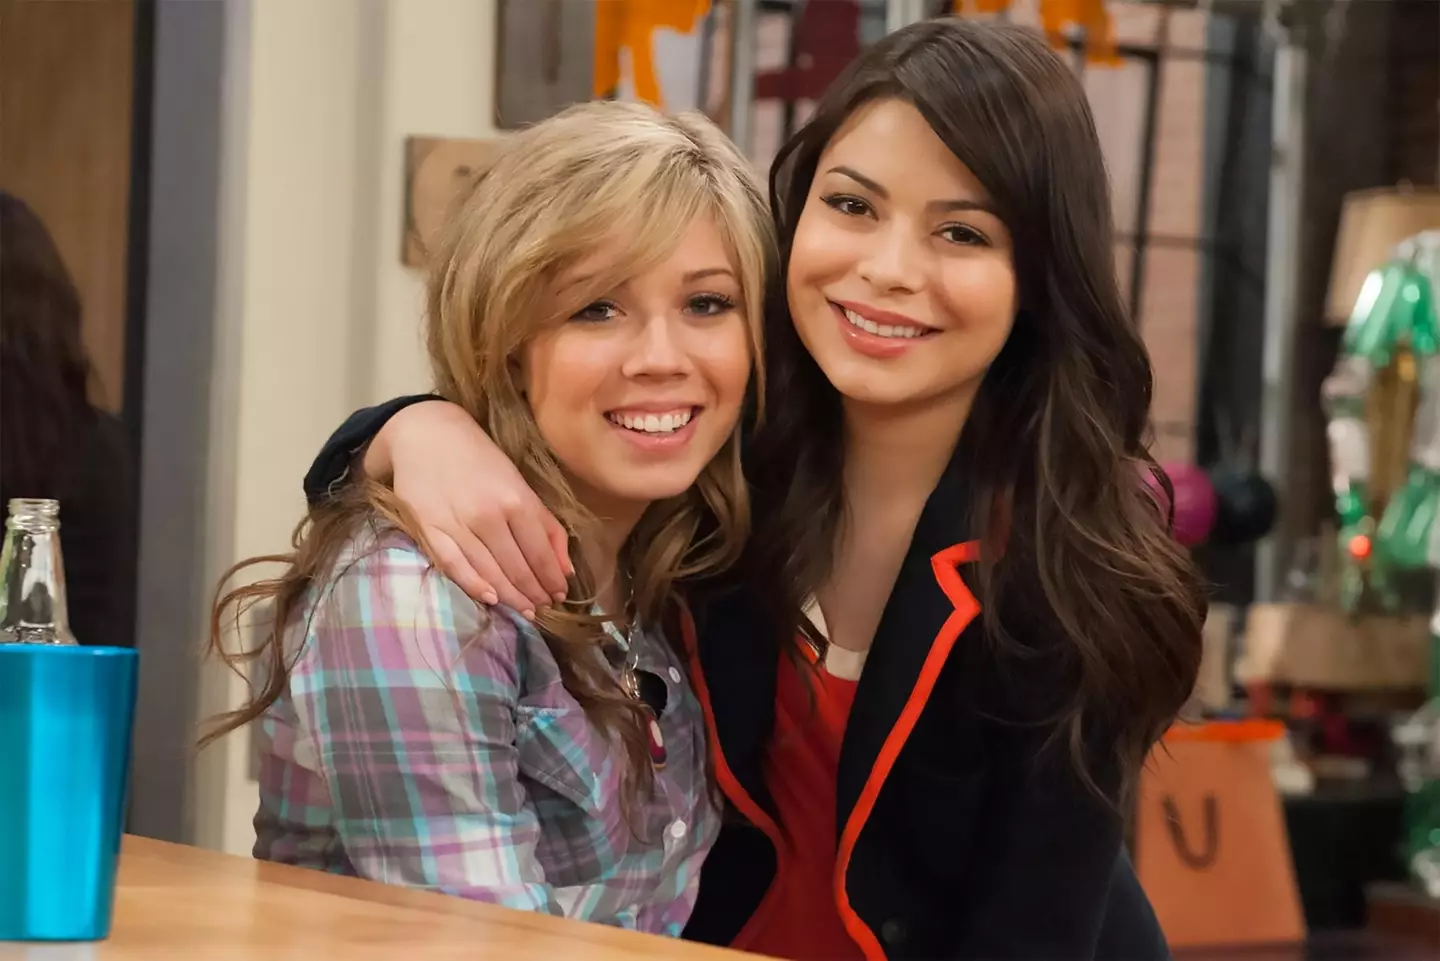 Jennette McCurdy rose to fame on iCarly.